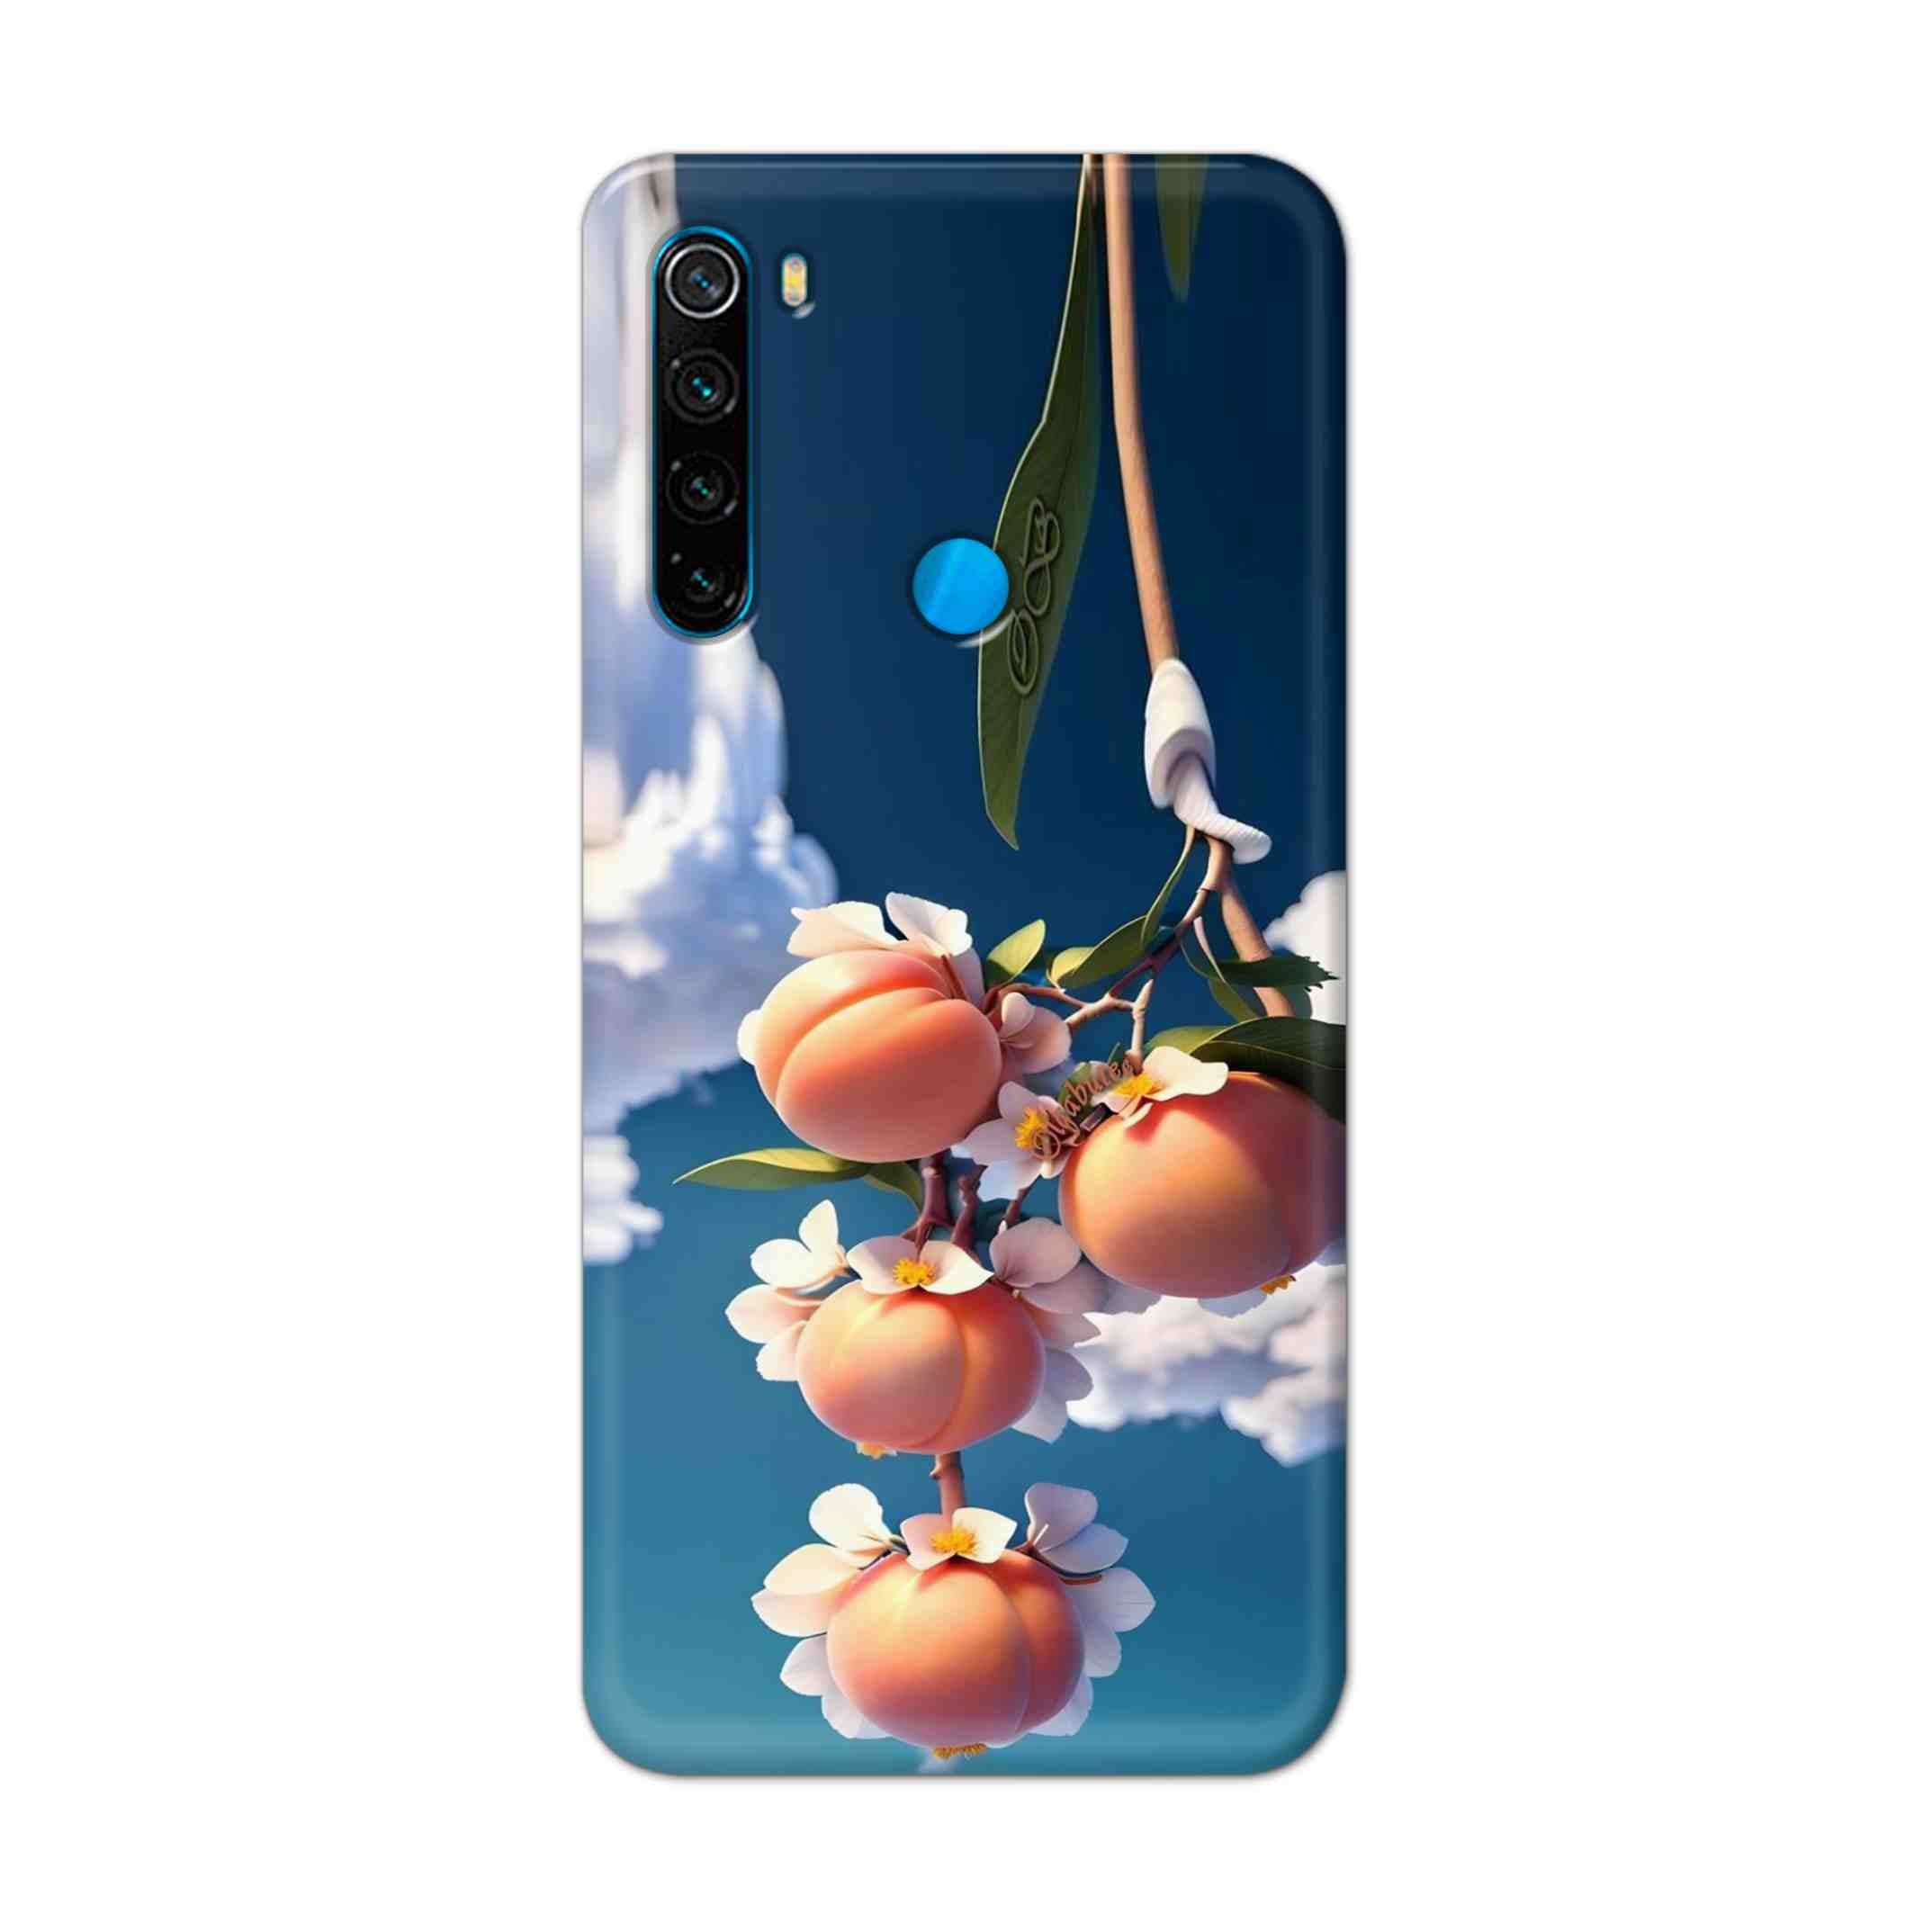 Buy Fruit Hard Back Mobile Phone Case Cover For Xiaomi Redmi Note 8 Online